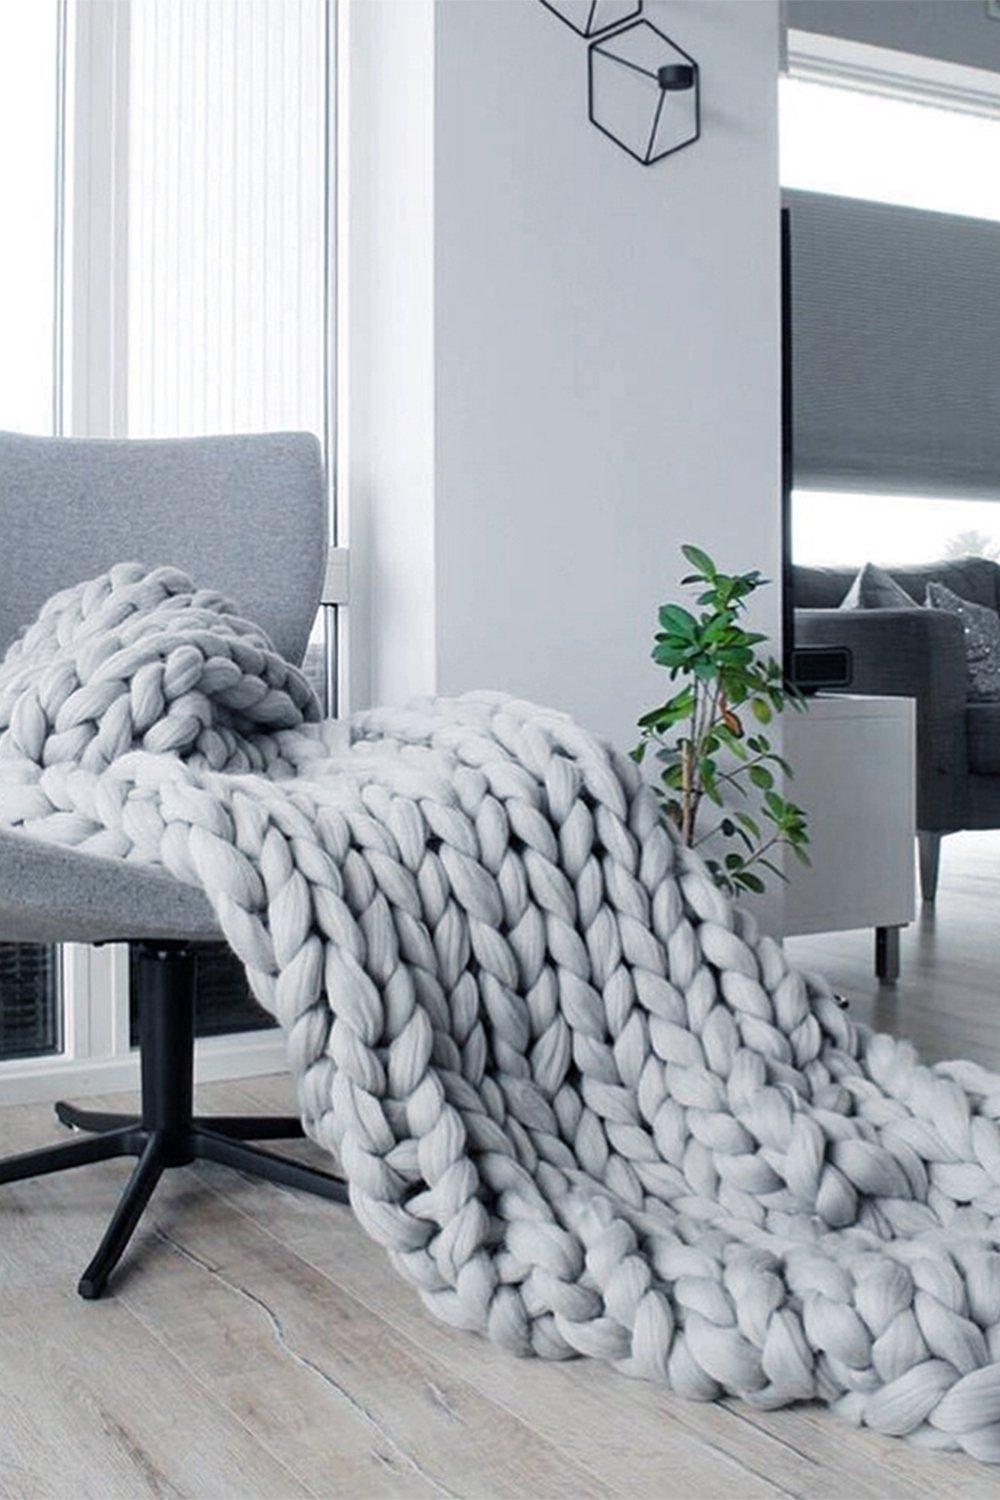 Chunky Knit Blanket Cotton Handmade Throw Blanket for Bed Couch Home Decor 100x120cm